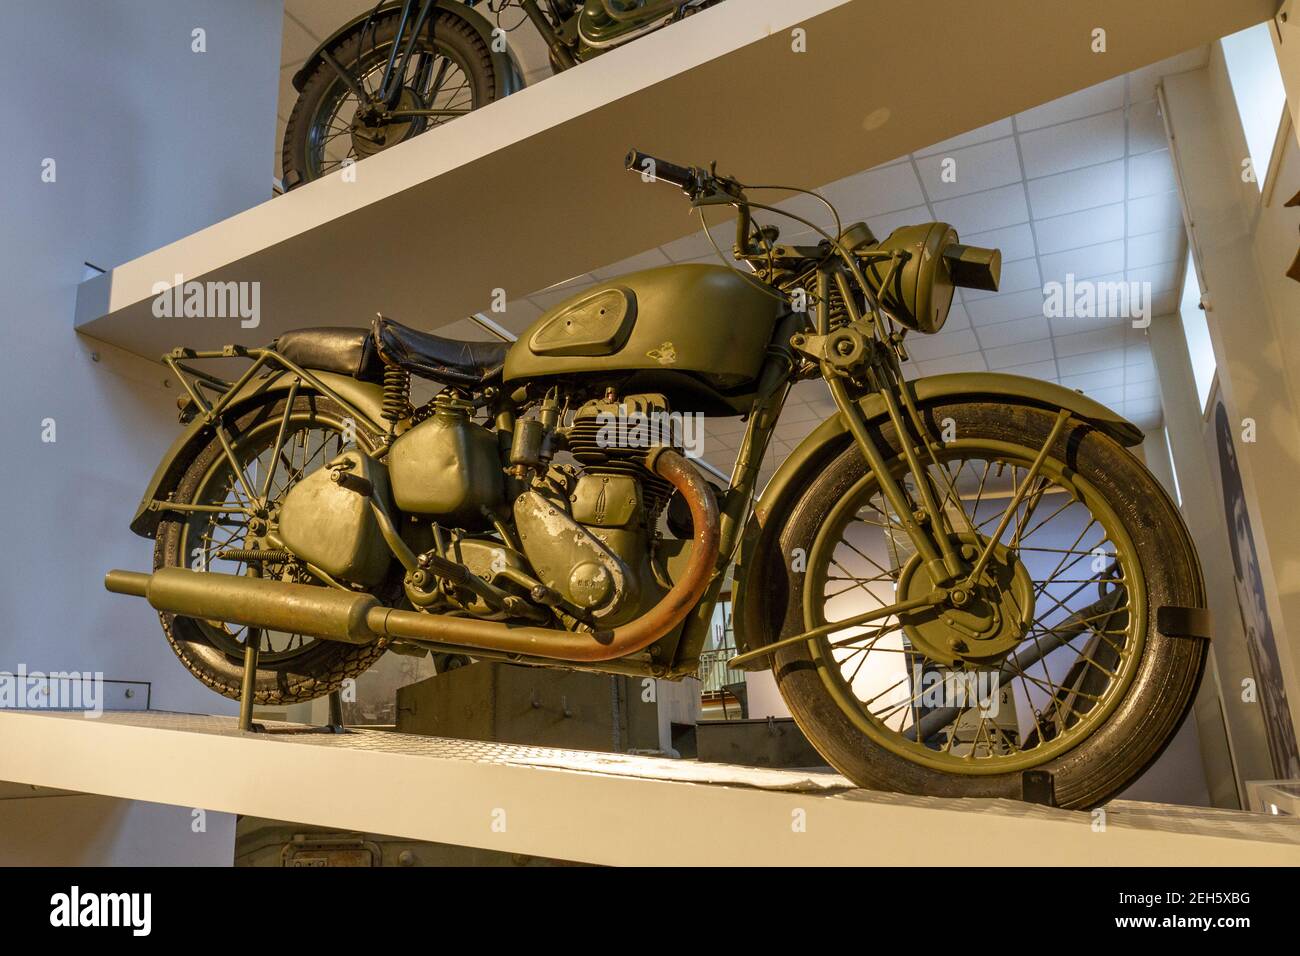 Una motocicletta militare BSA M20 1940 nel Museo REME (Royal Electrical and Mechanical Engineers), Lyneham, Wiltshire, Regno Unito Foto Stock